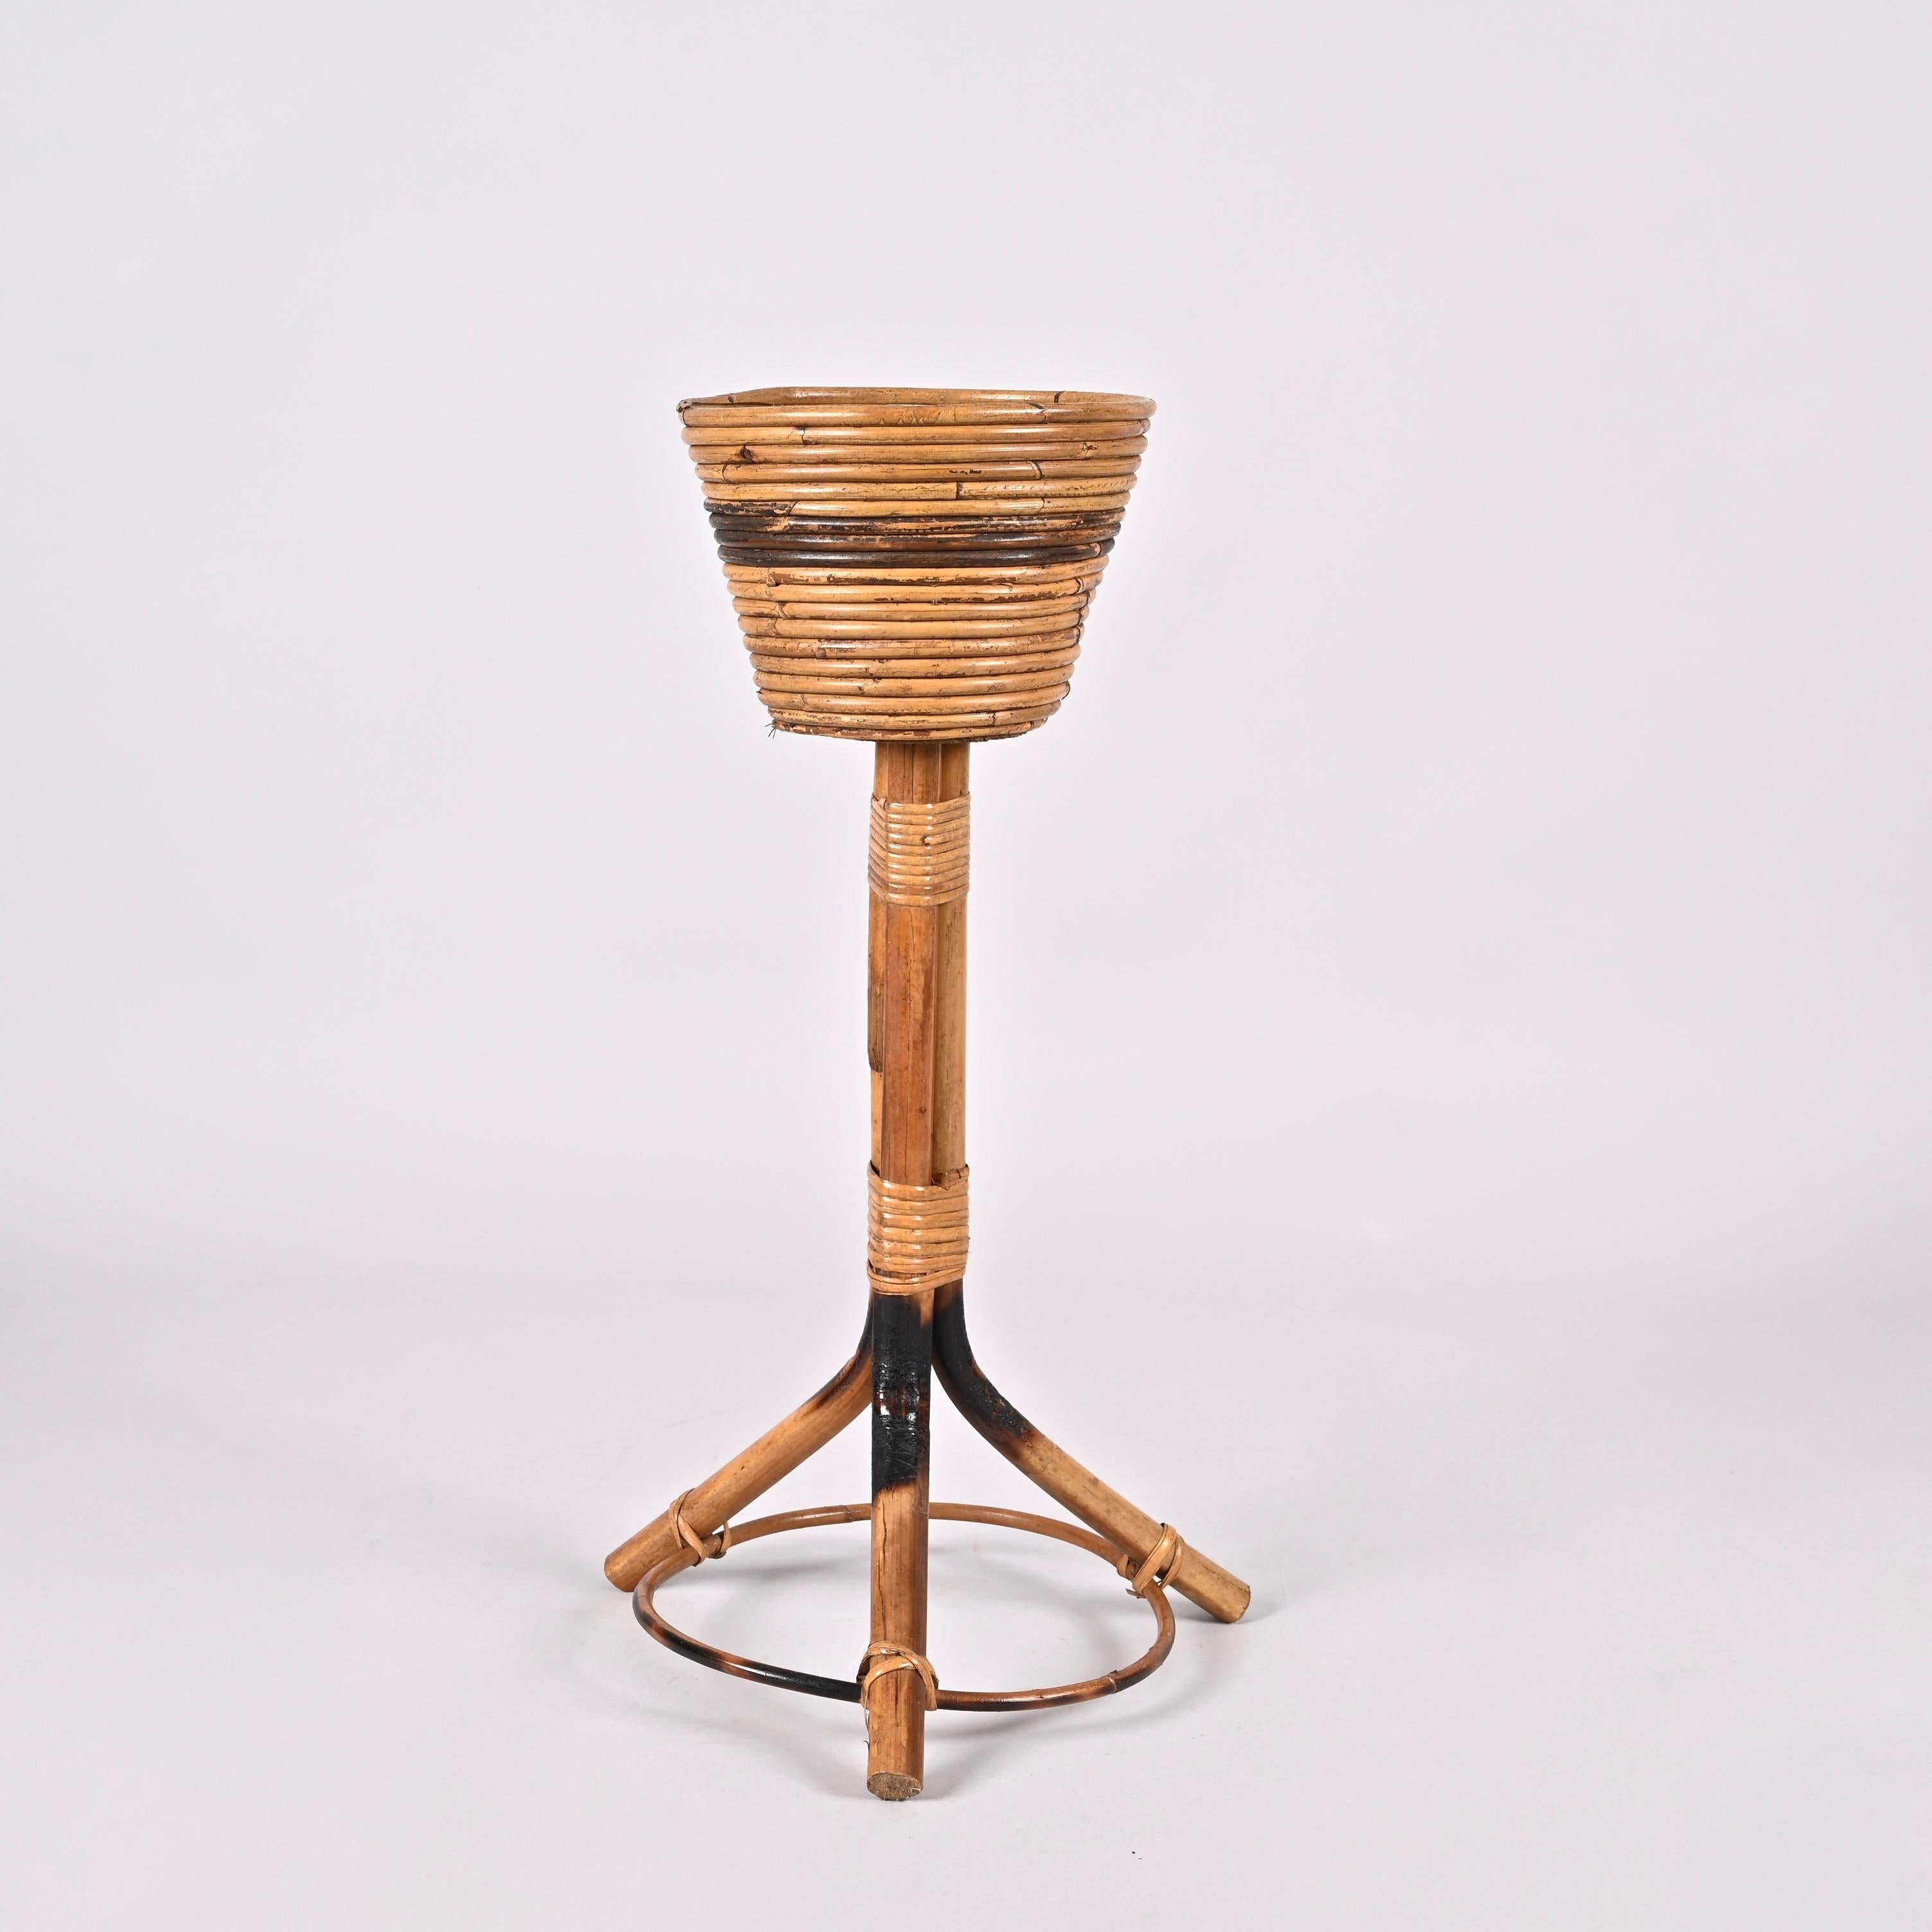 Midcentury Italian Bamboo Cane and Rattan Round Plant Holder, 1950s For Sale 1